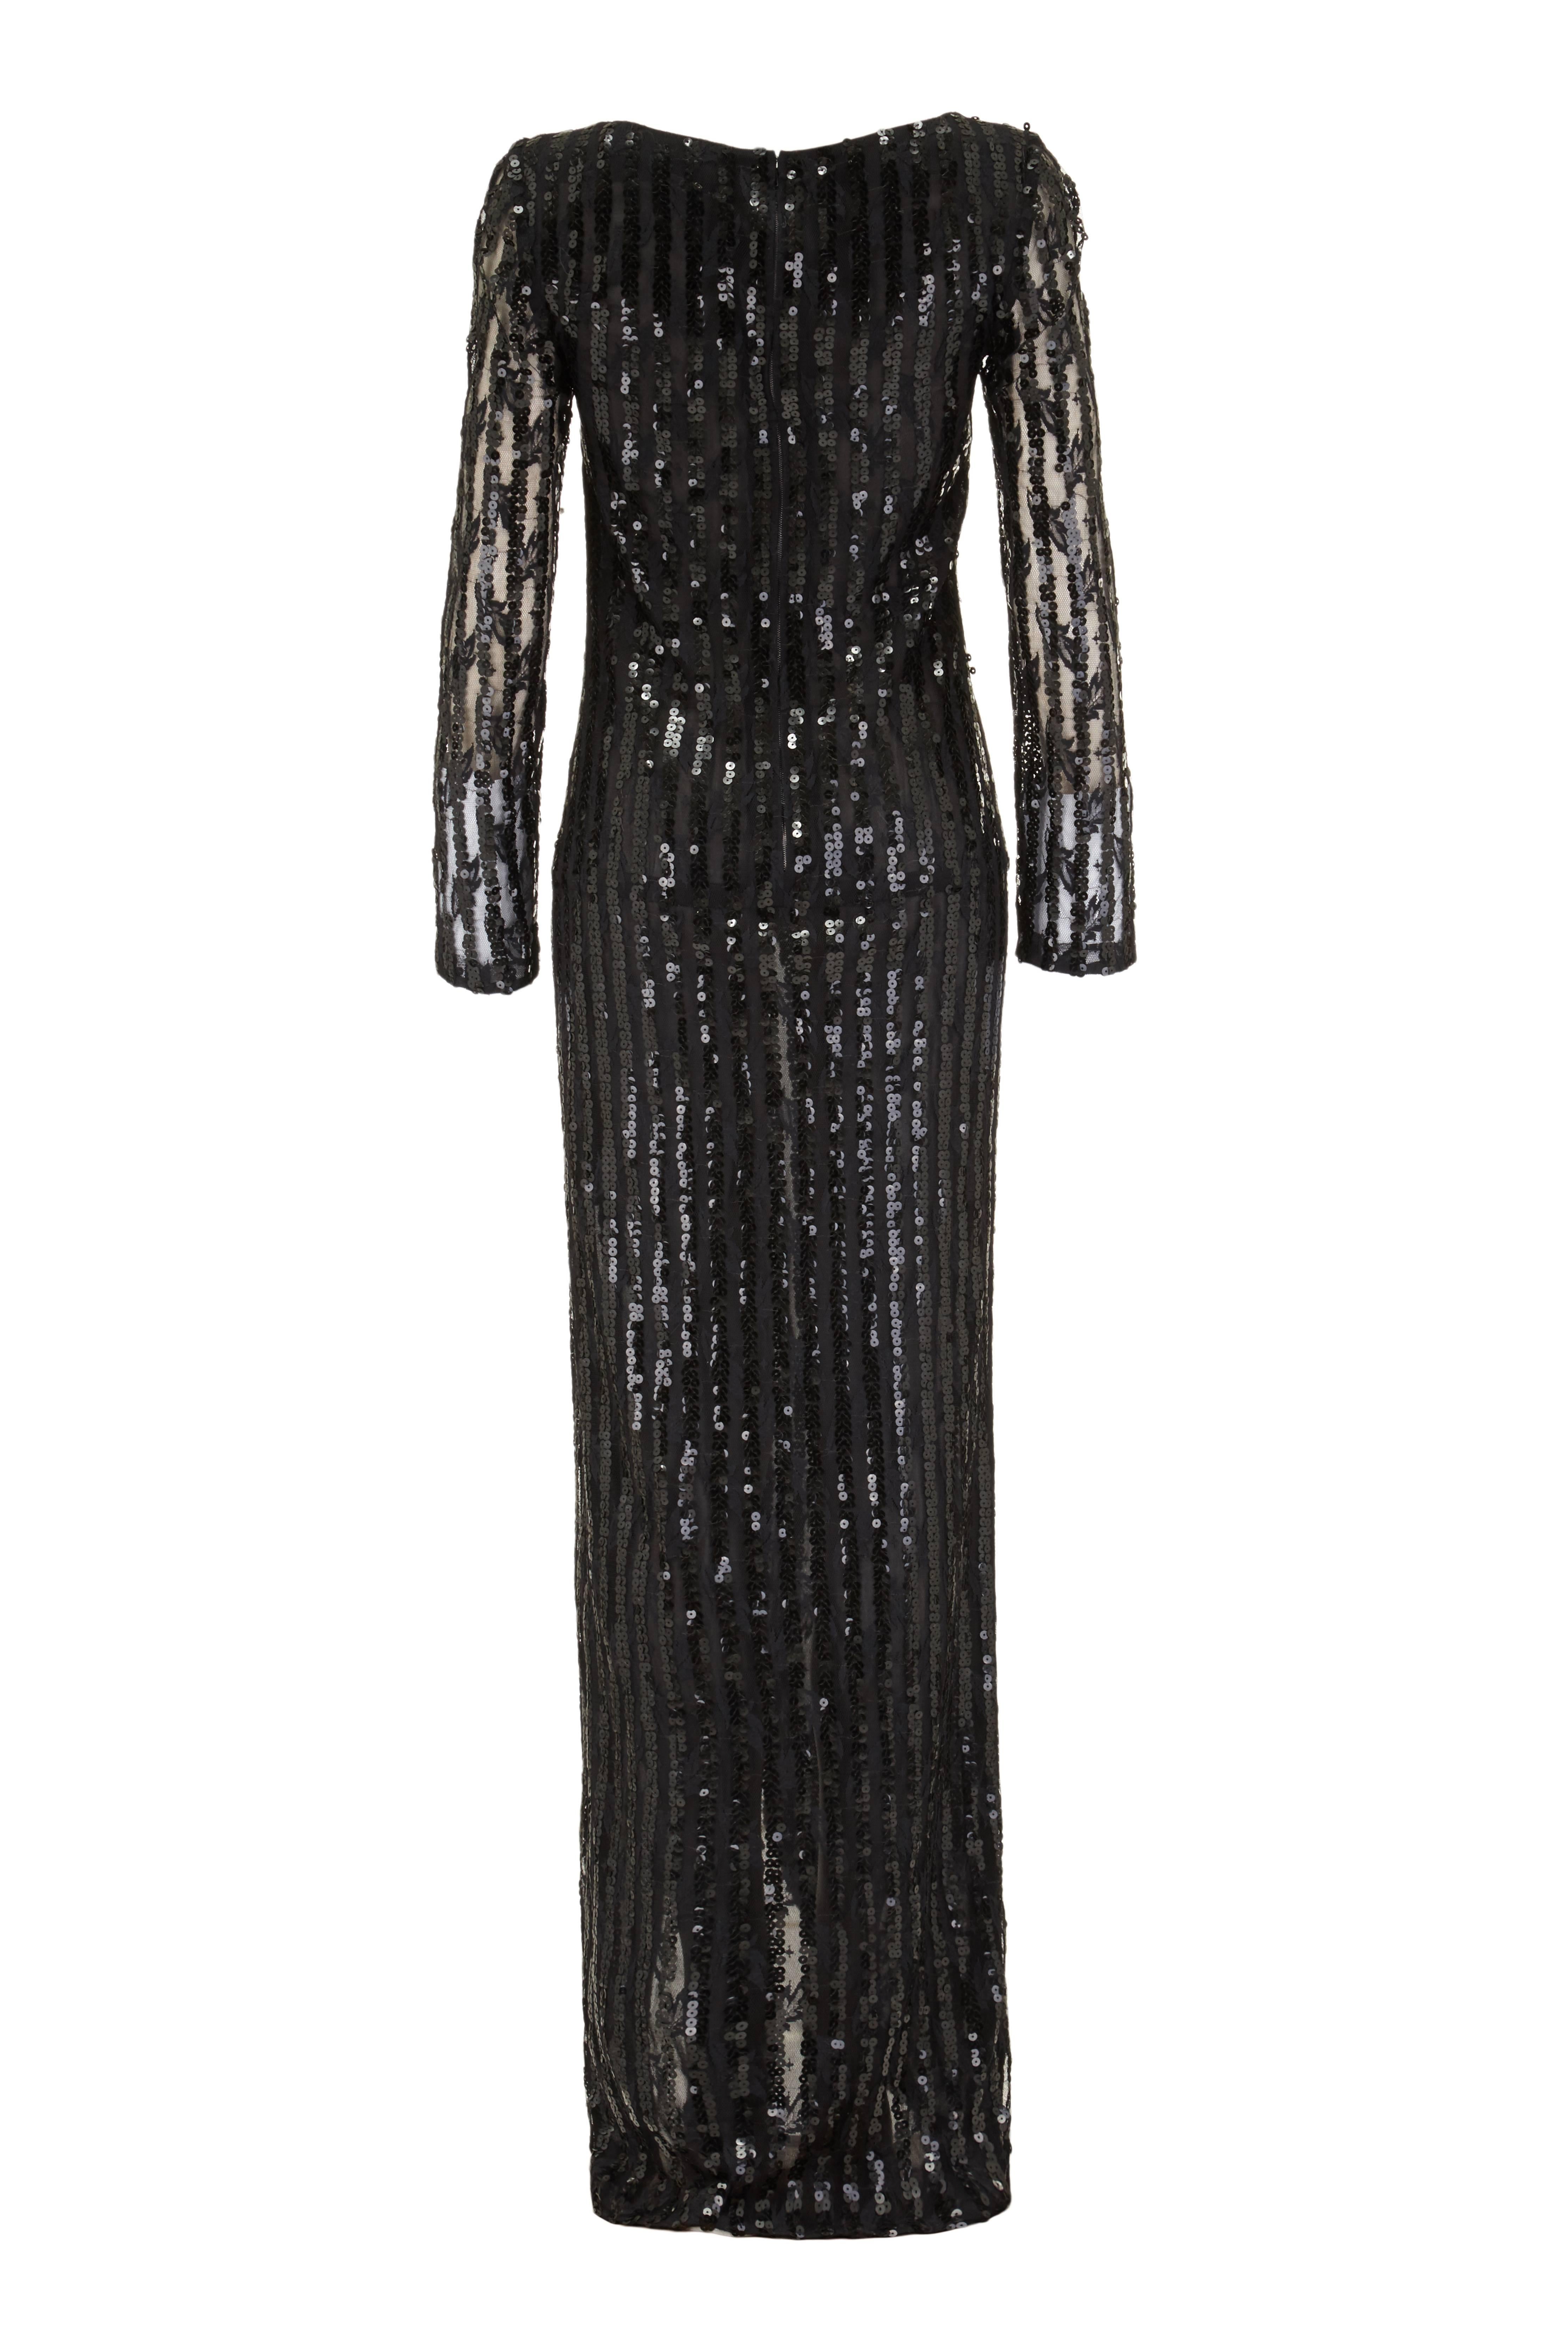 This sensational full length black lace sequin evening dress from Italian design Andre Laug exudes glamour and is guaranteed to turn heads! This striking piece is made of a rayon lace net with vertical stripes of black sequins throughout. The main